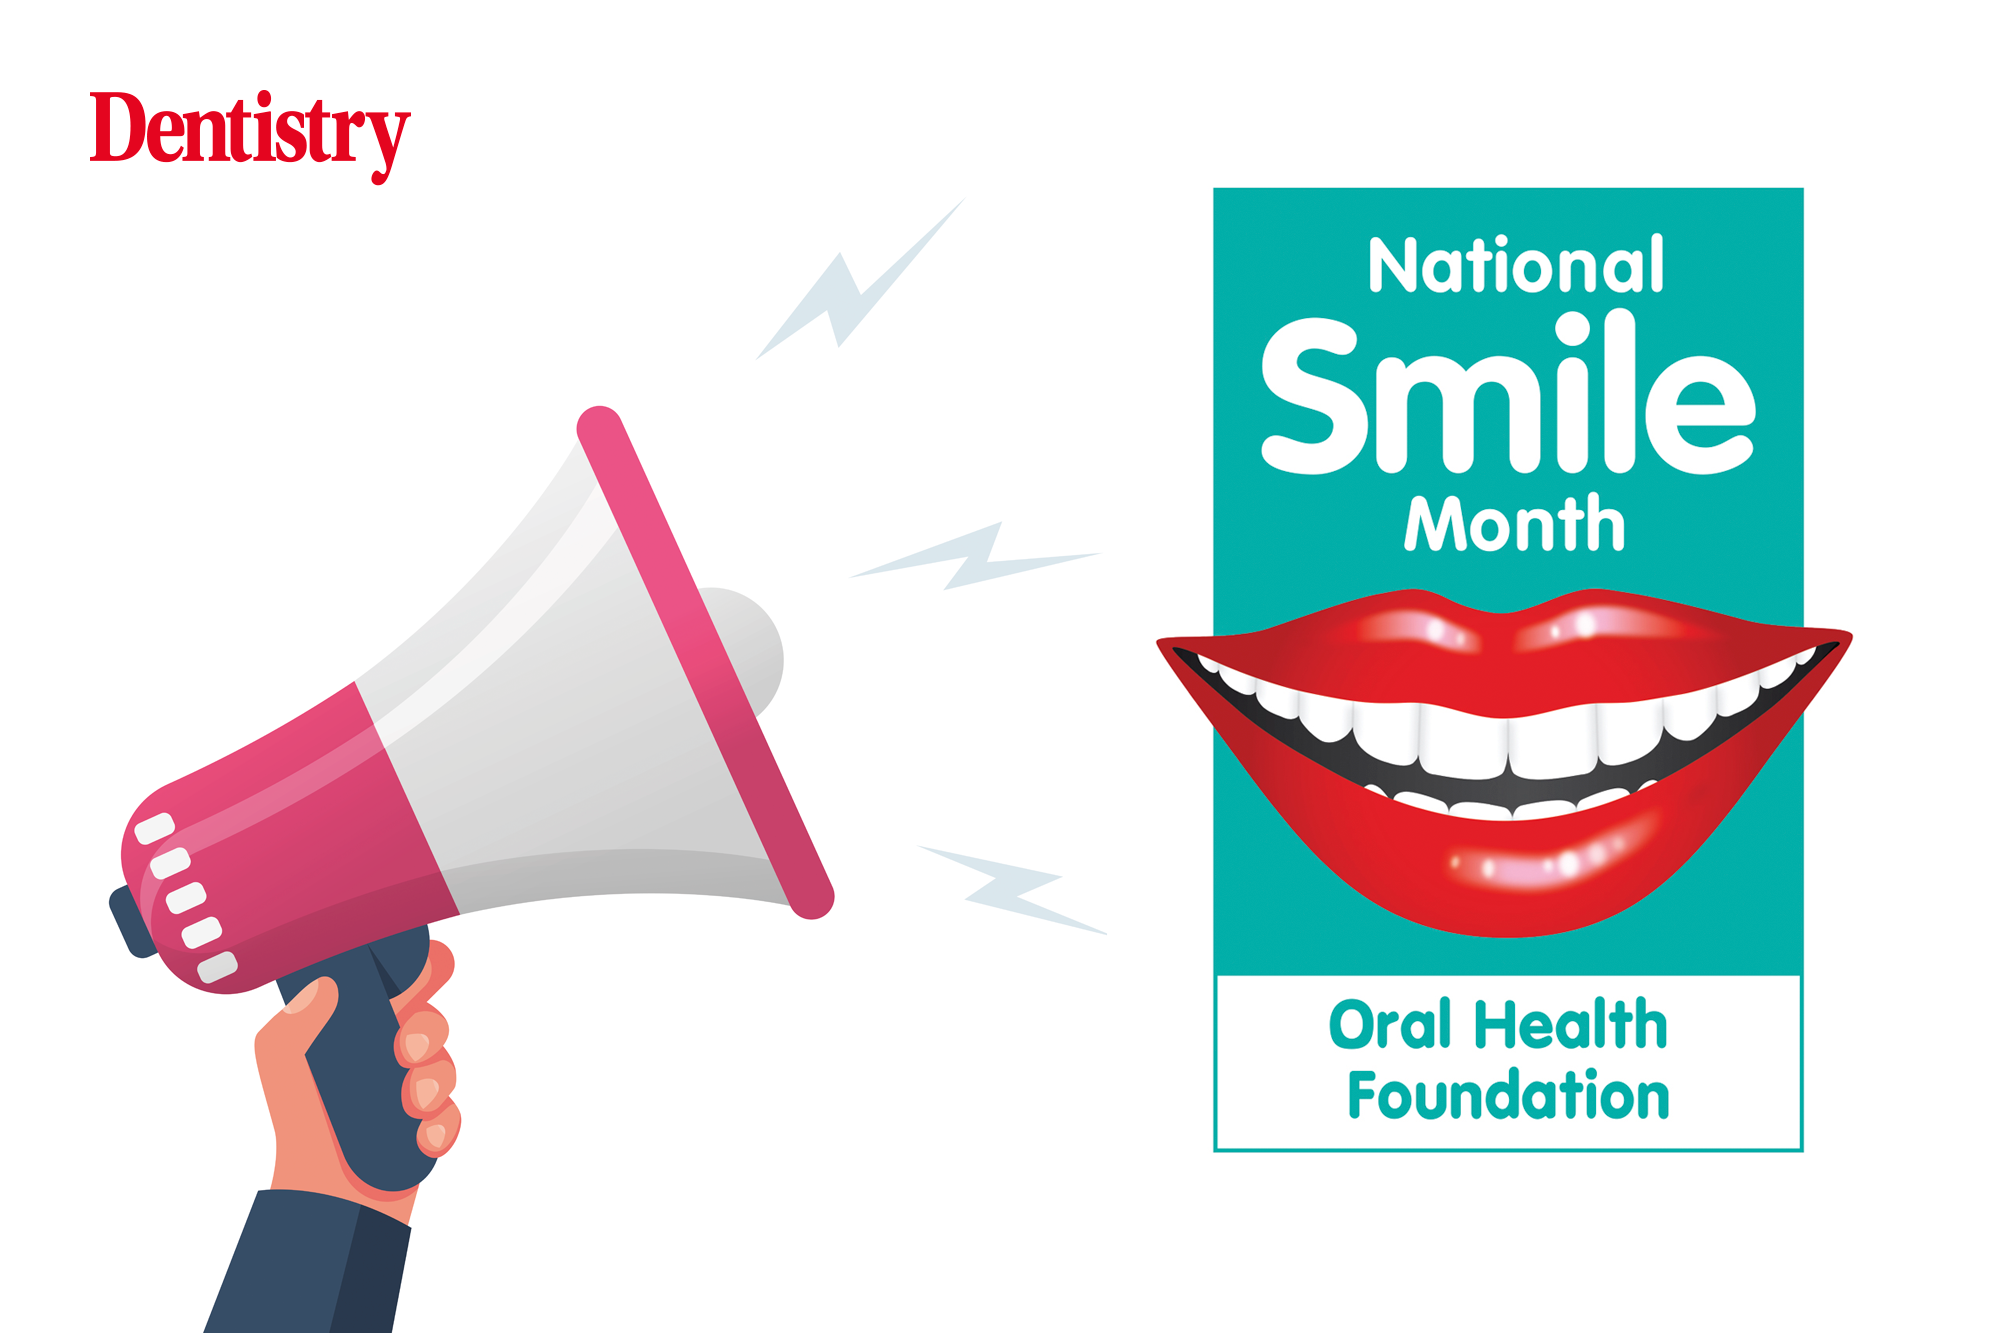 Stacey McMaster explains how you can get involved with National Smile Month